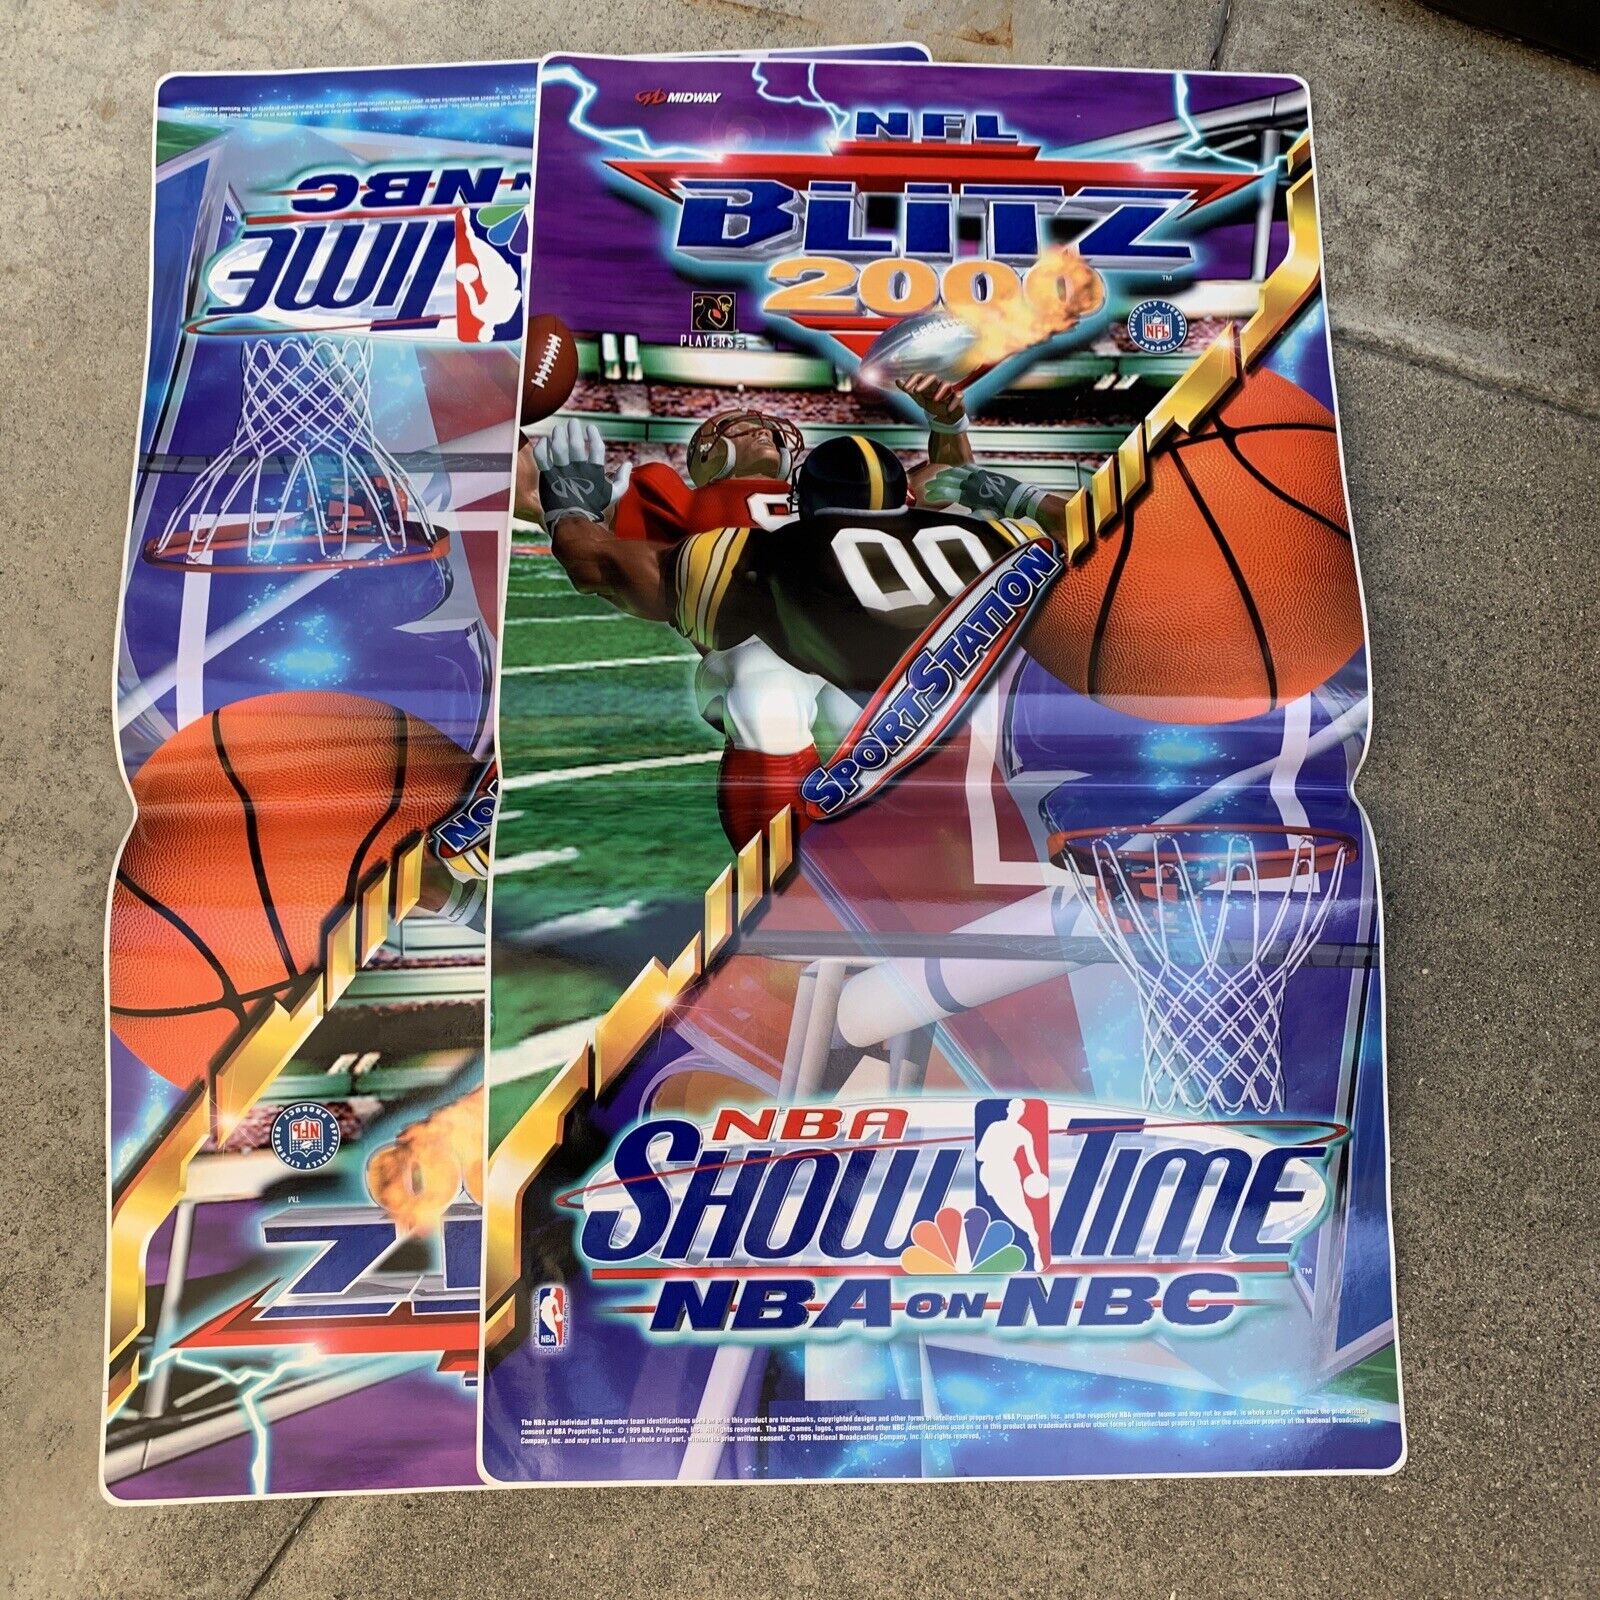 Lot Of 2 Old Blitz 2000 Nba Original factory Cabinet Stickers Arcade video Game